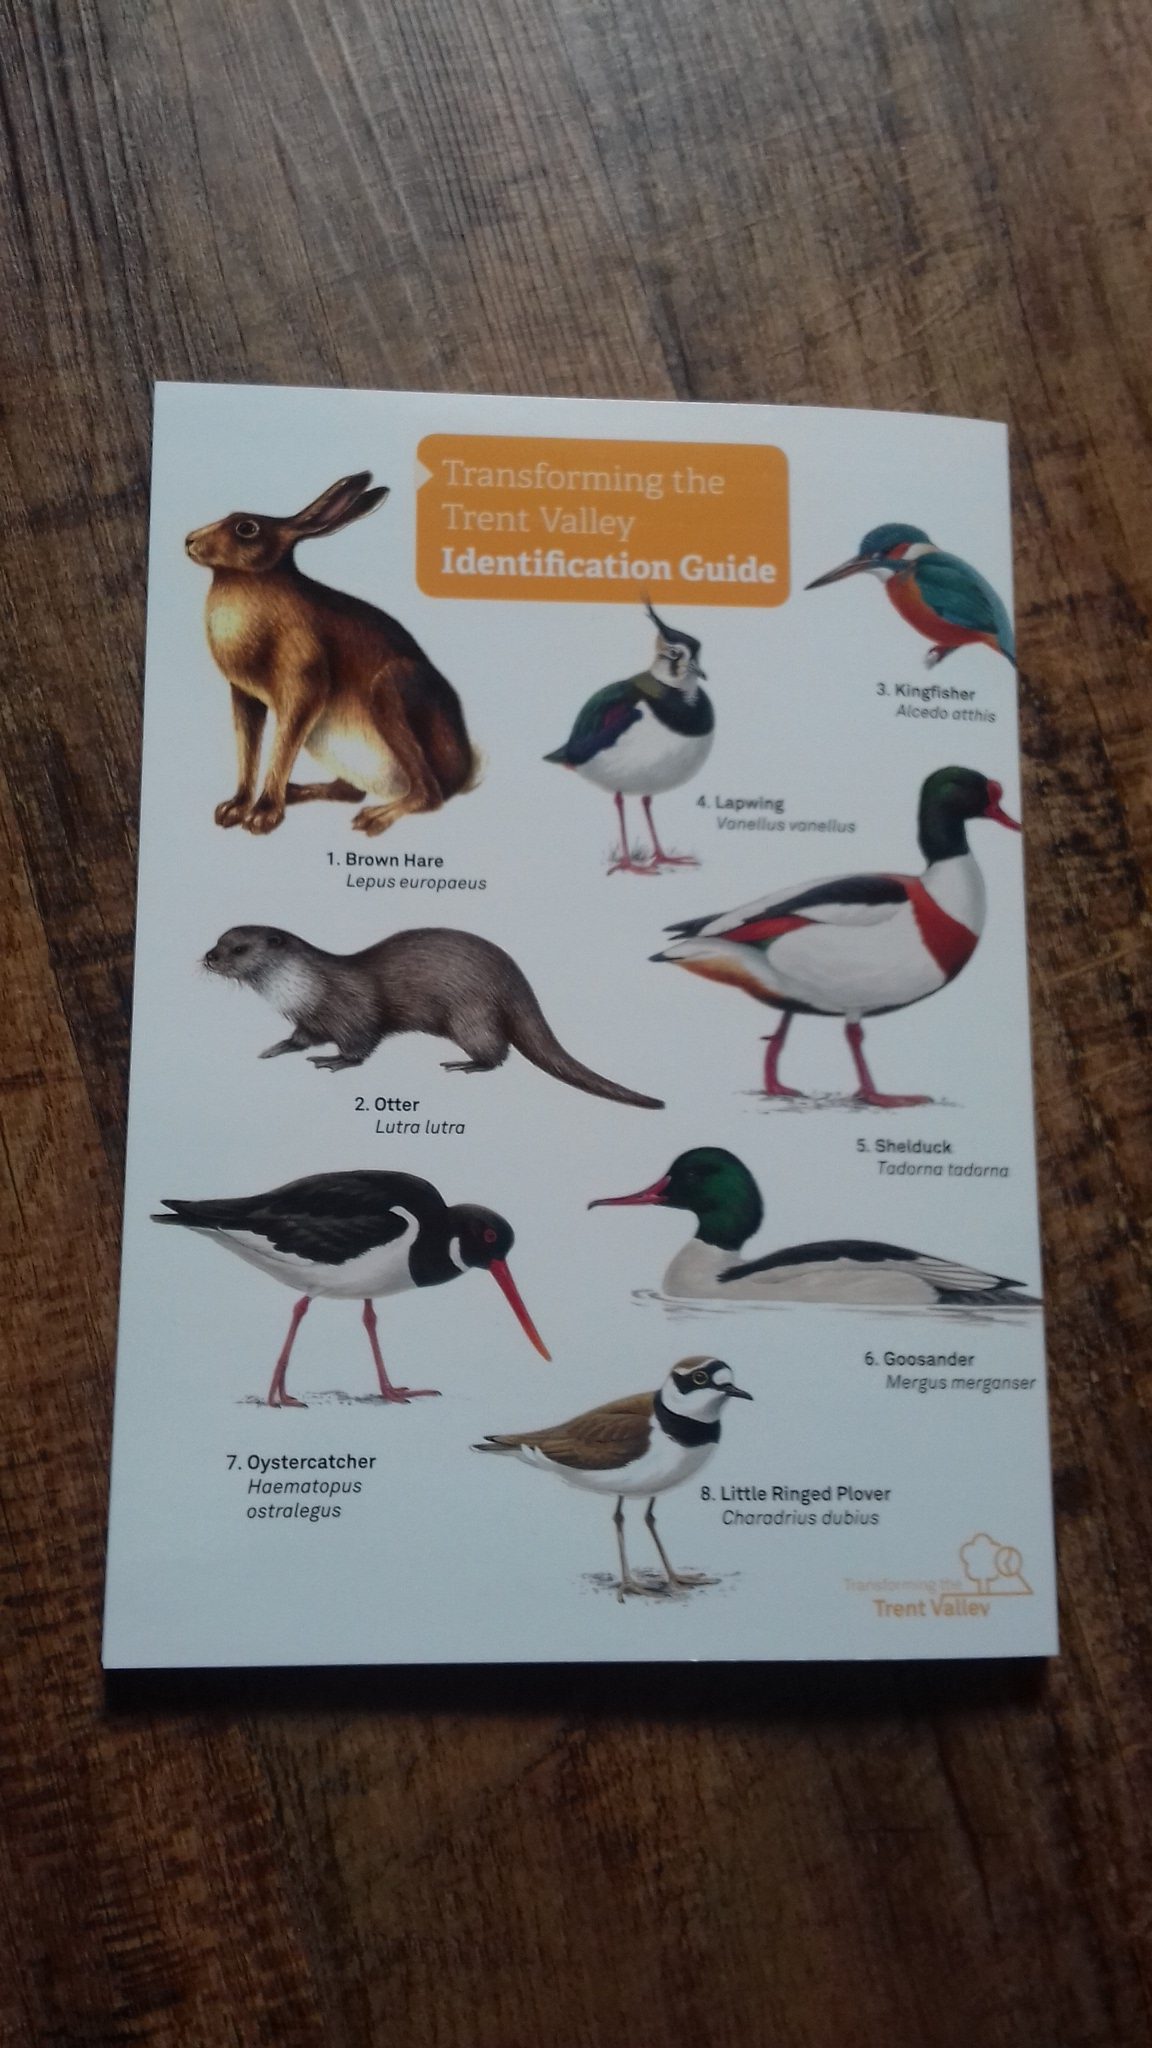 A leaflet with a number of birds shown on the front